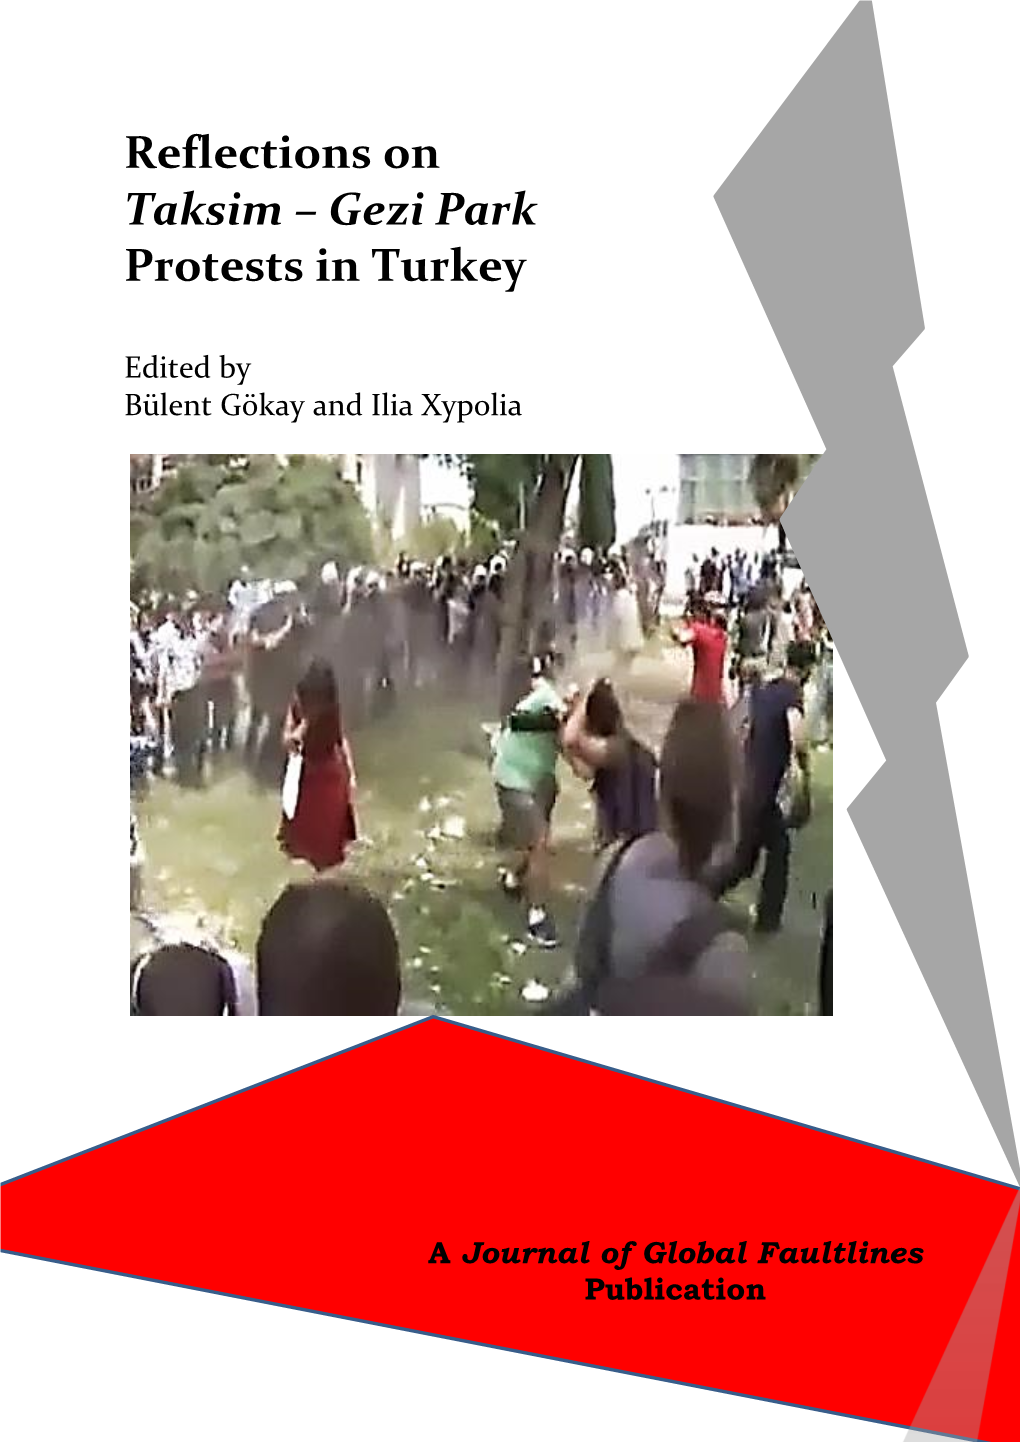 Gezi Park Protests in Turkey